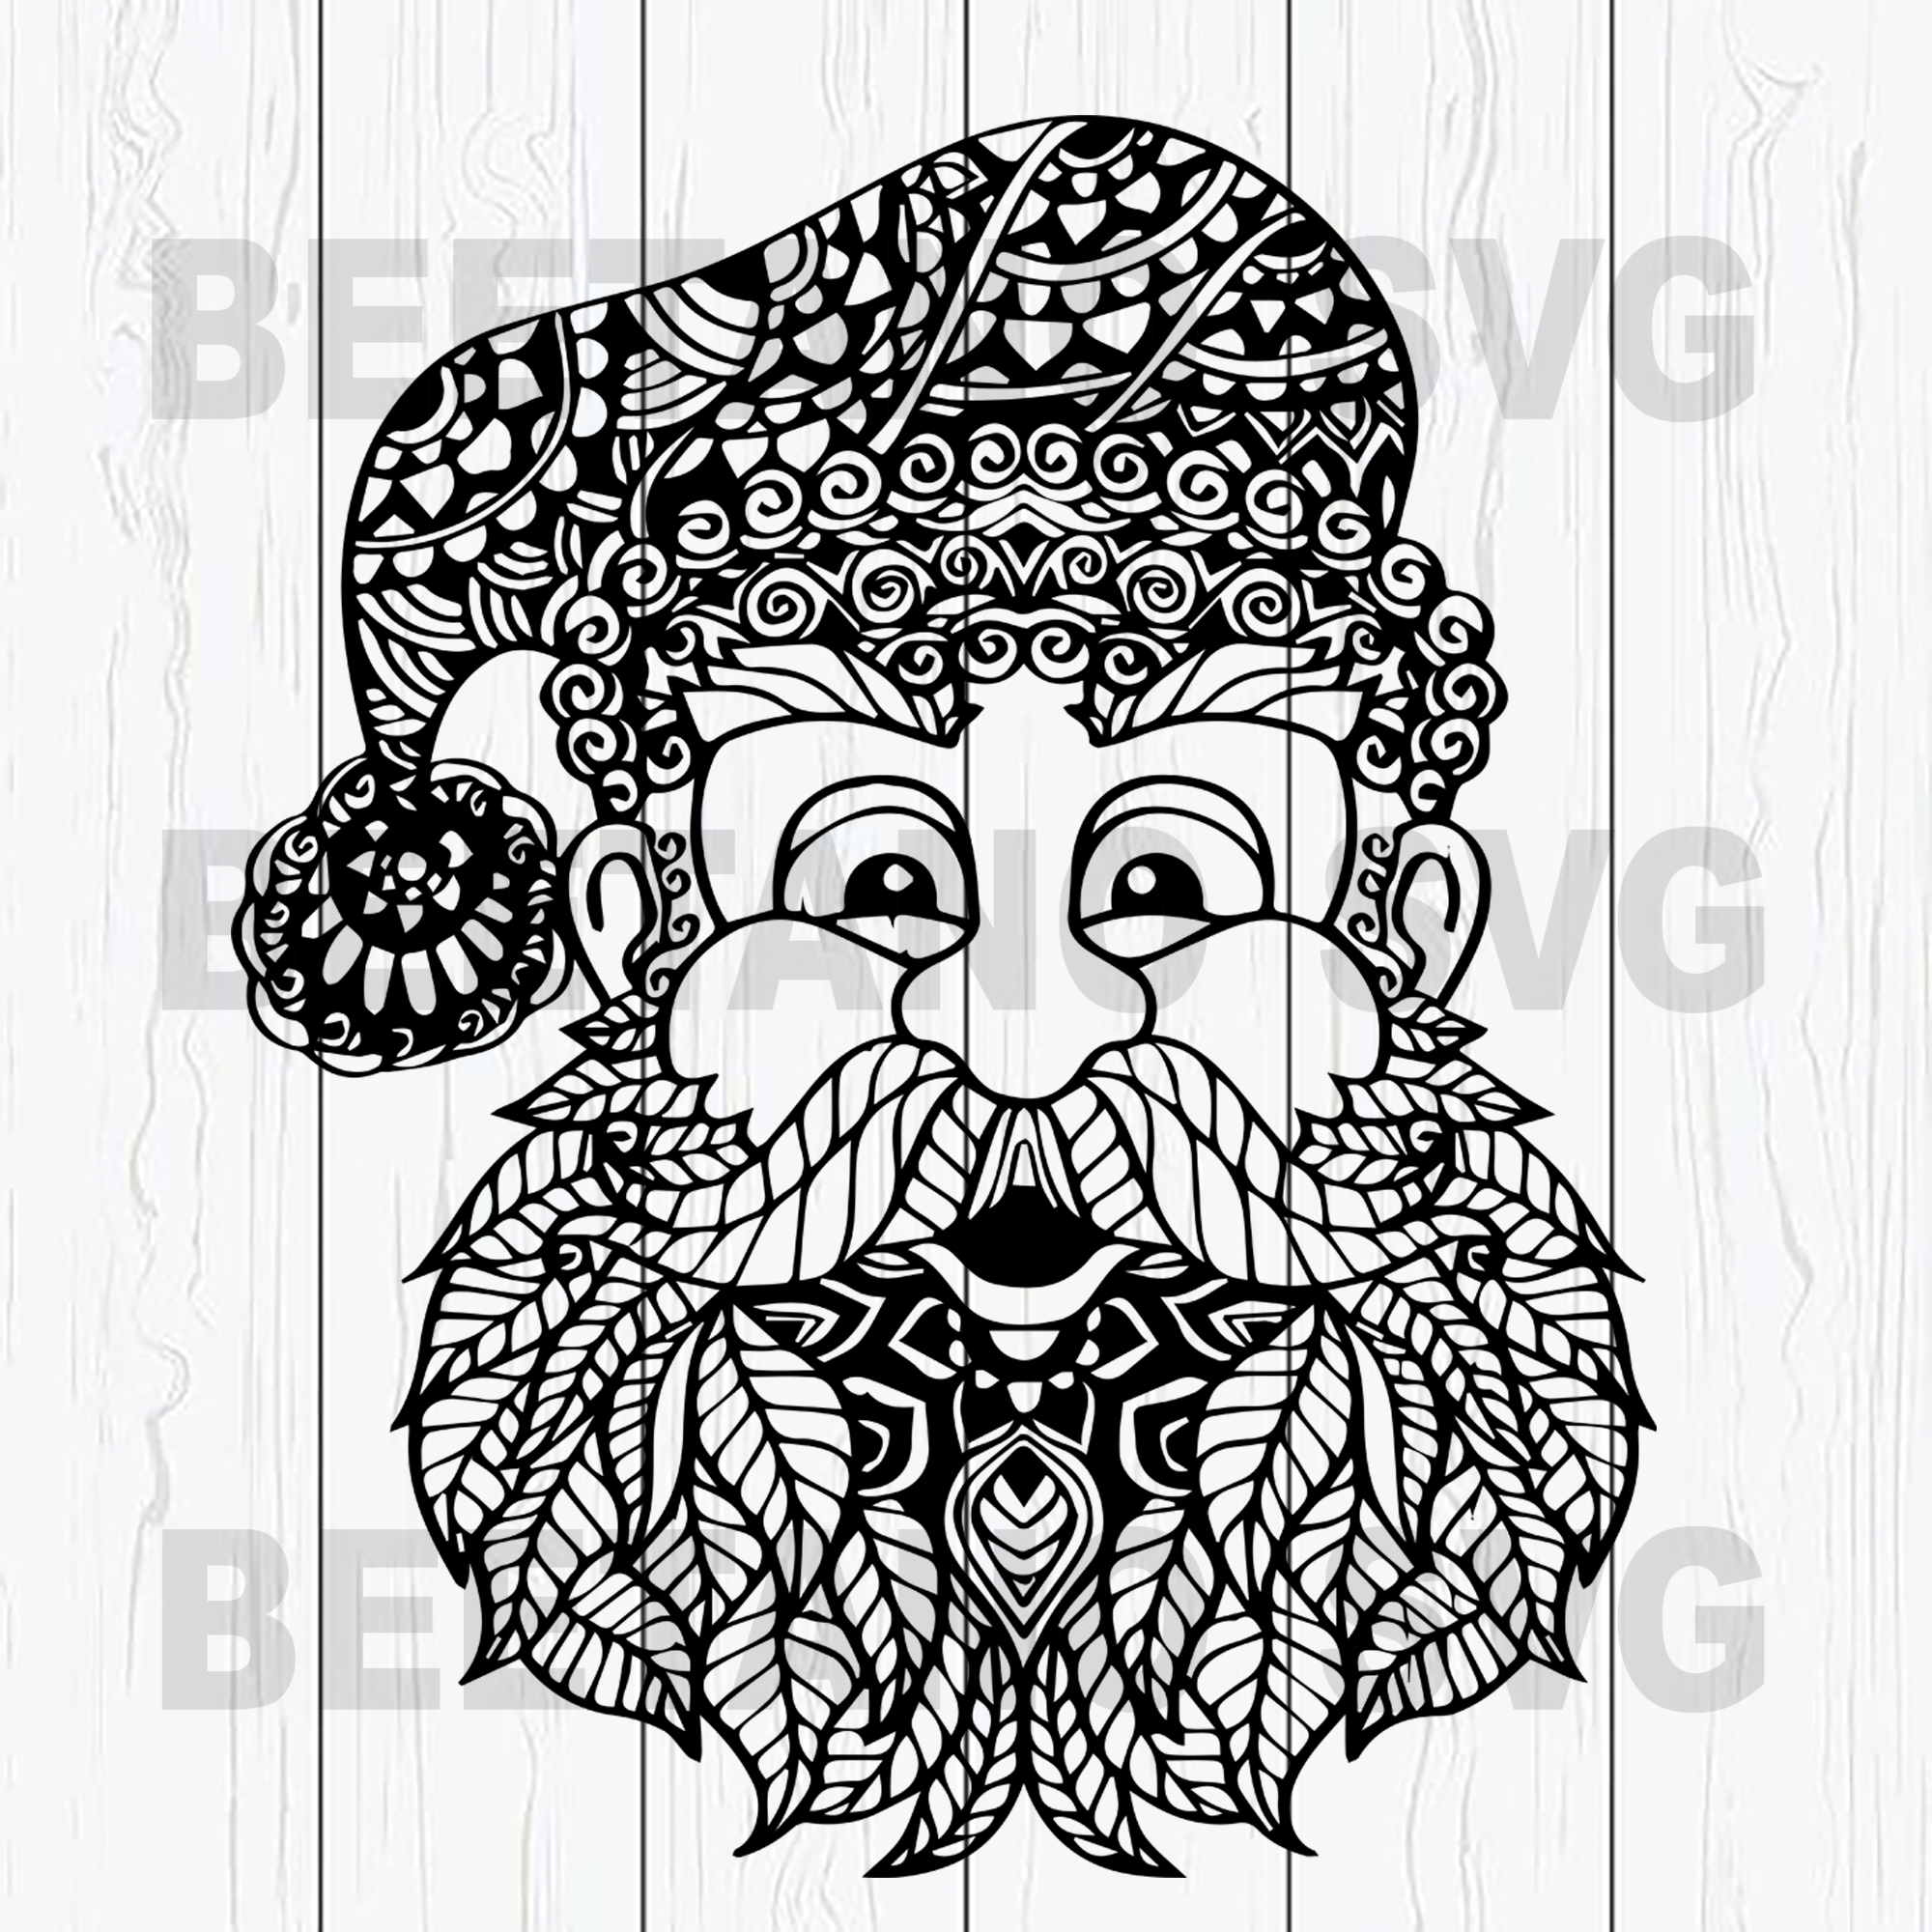 Download Svg Vector Christmas Mandala File For Cutting Multilayer Santa Claus 3d Mandala Svg Instant Download Christmas Svg 3d Mandala Paper Party Kids Kits How To 330 Co Il